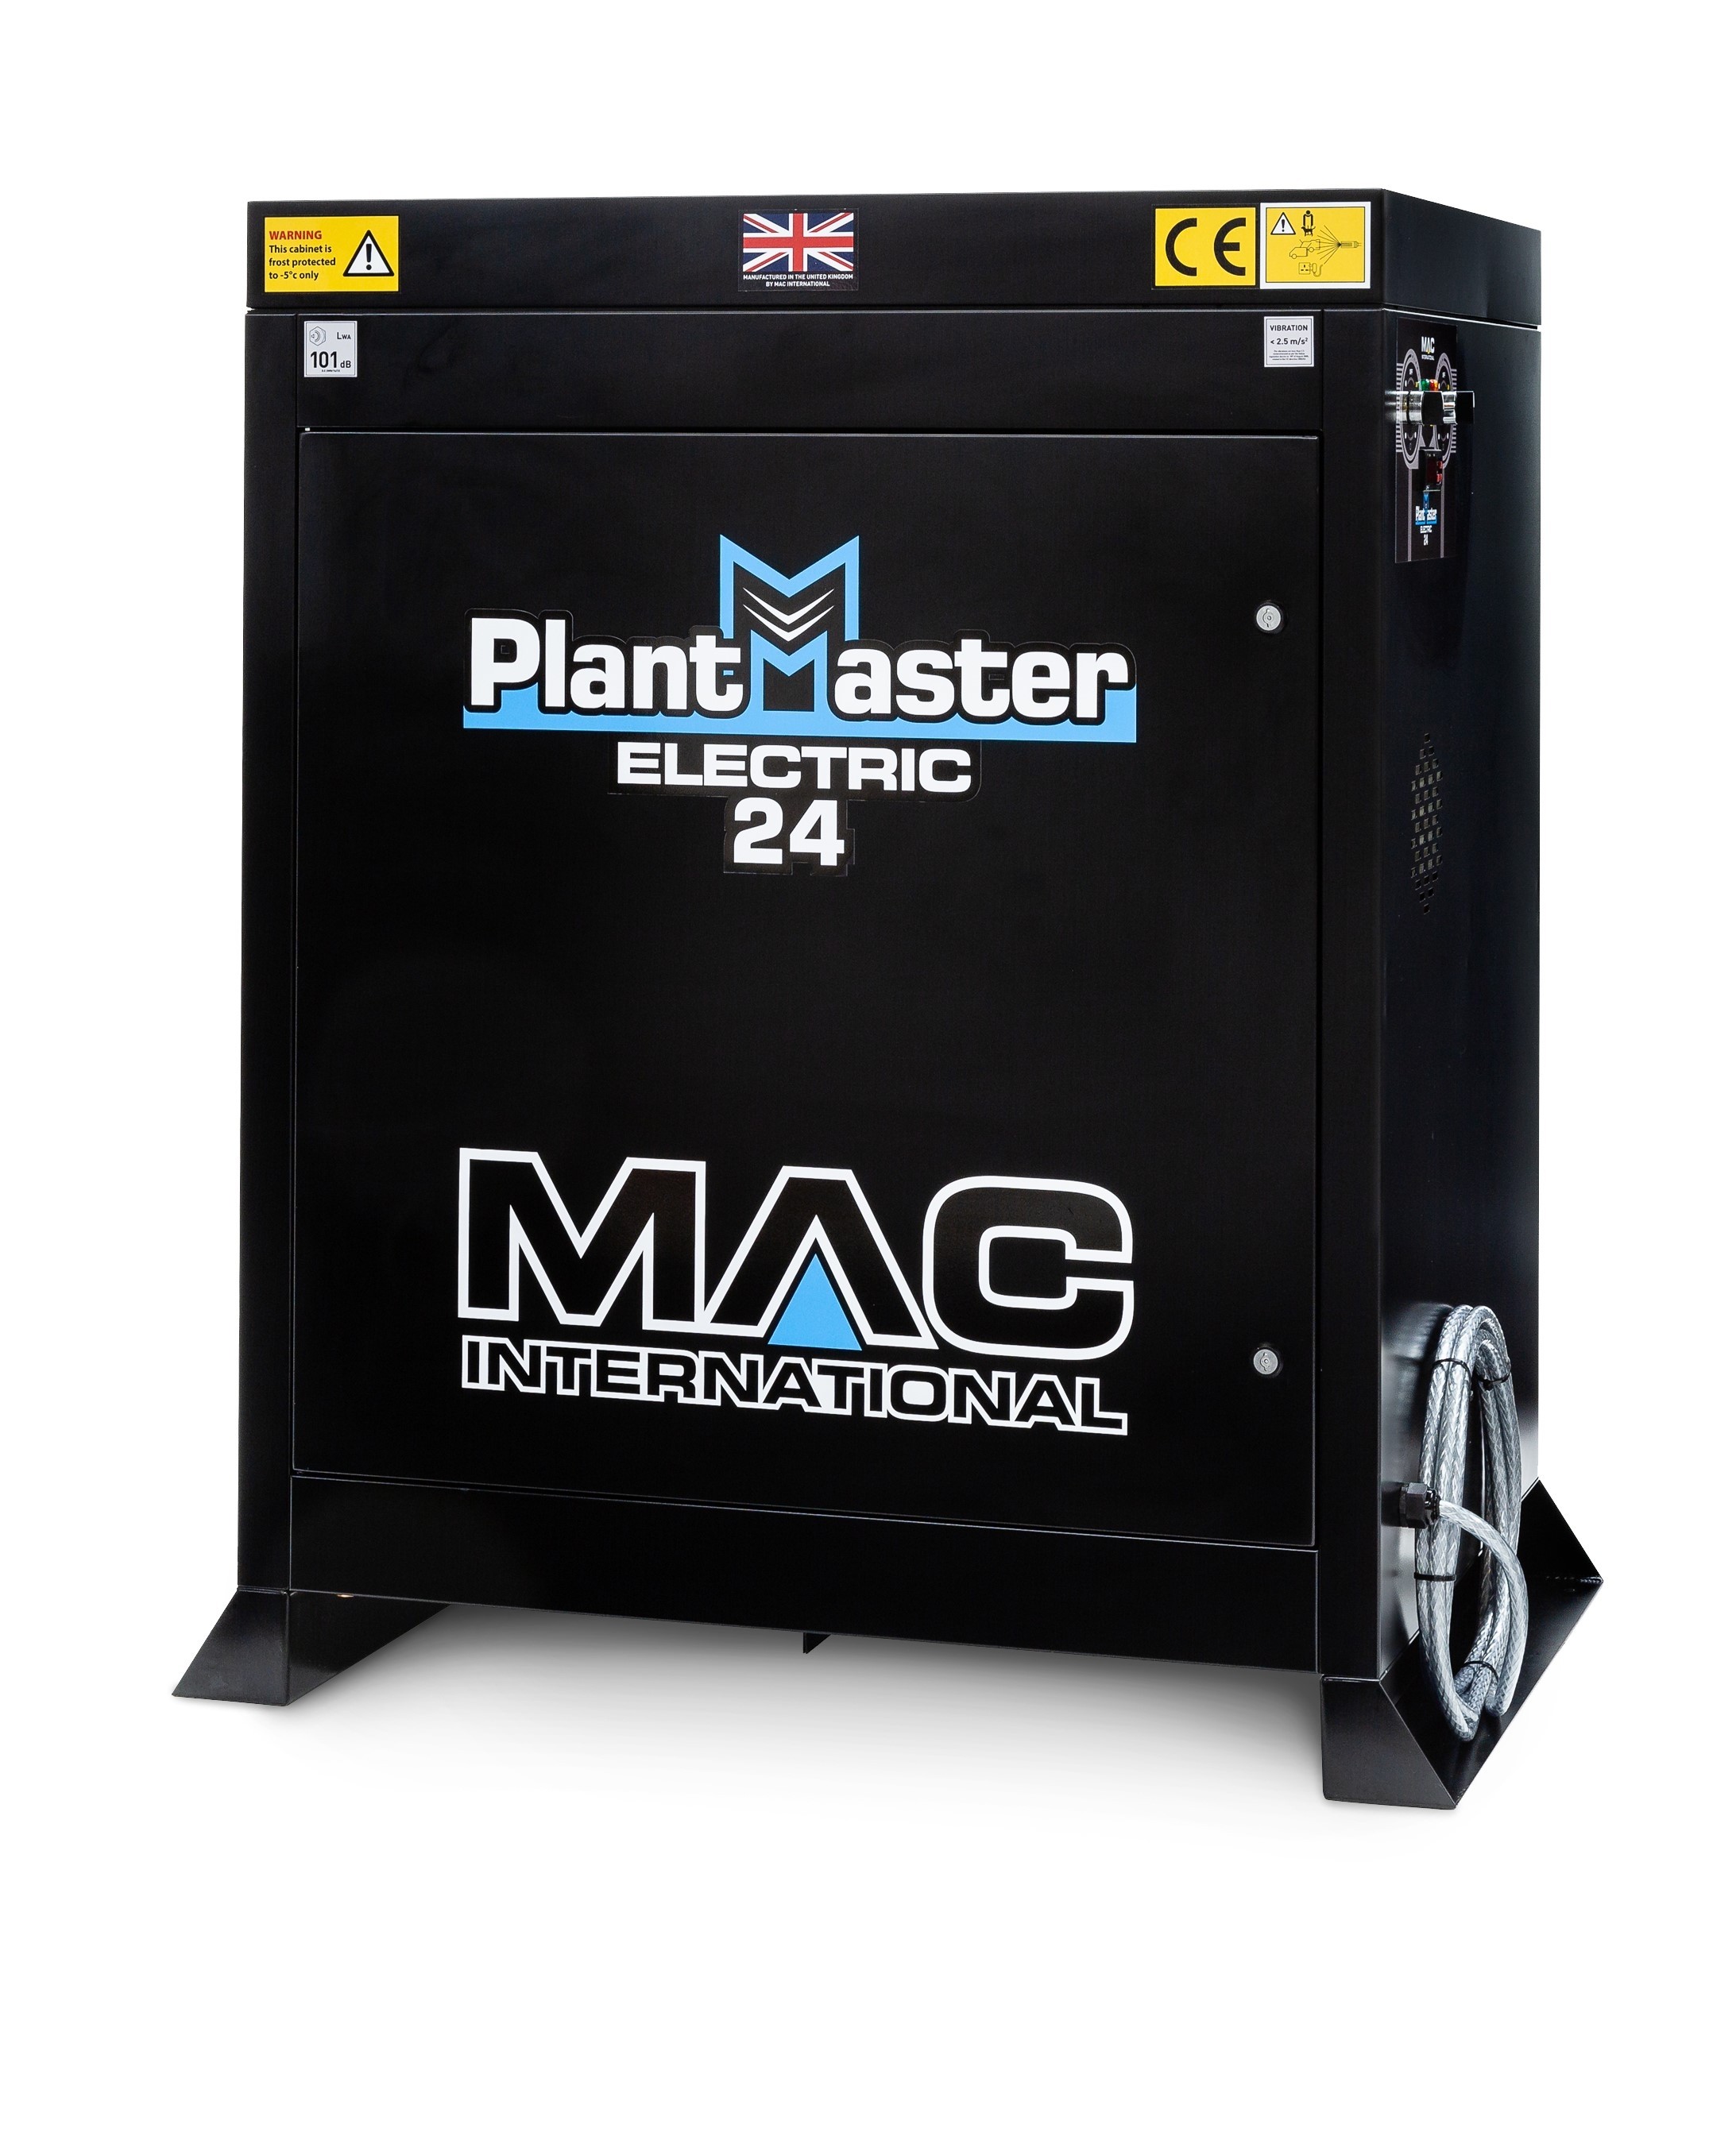 PLANTMASTER ELECTRIC